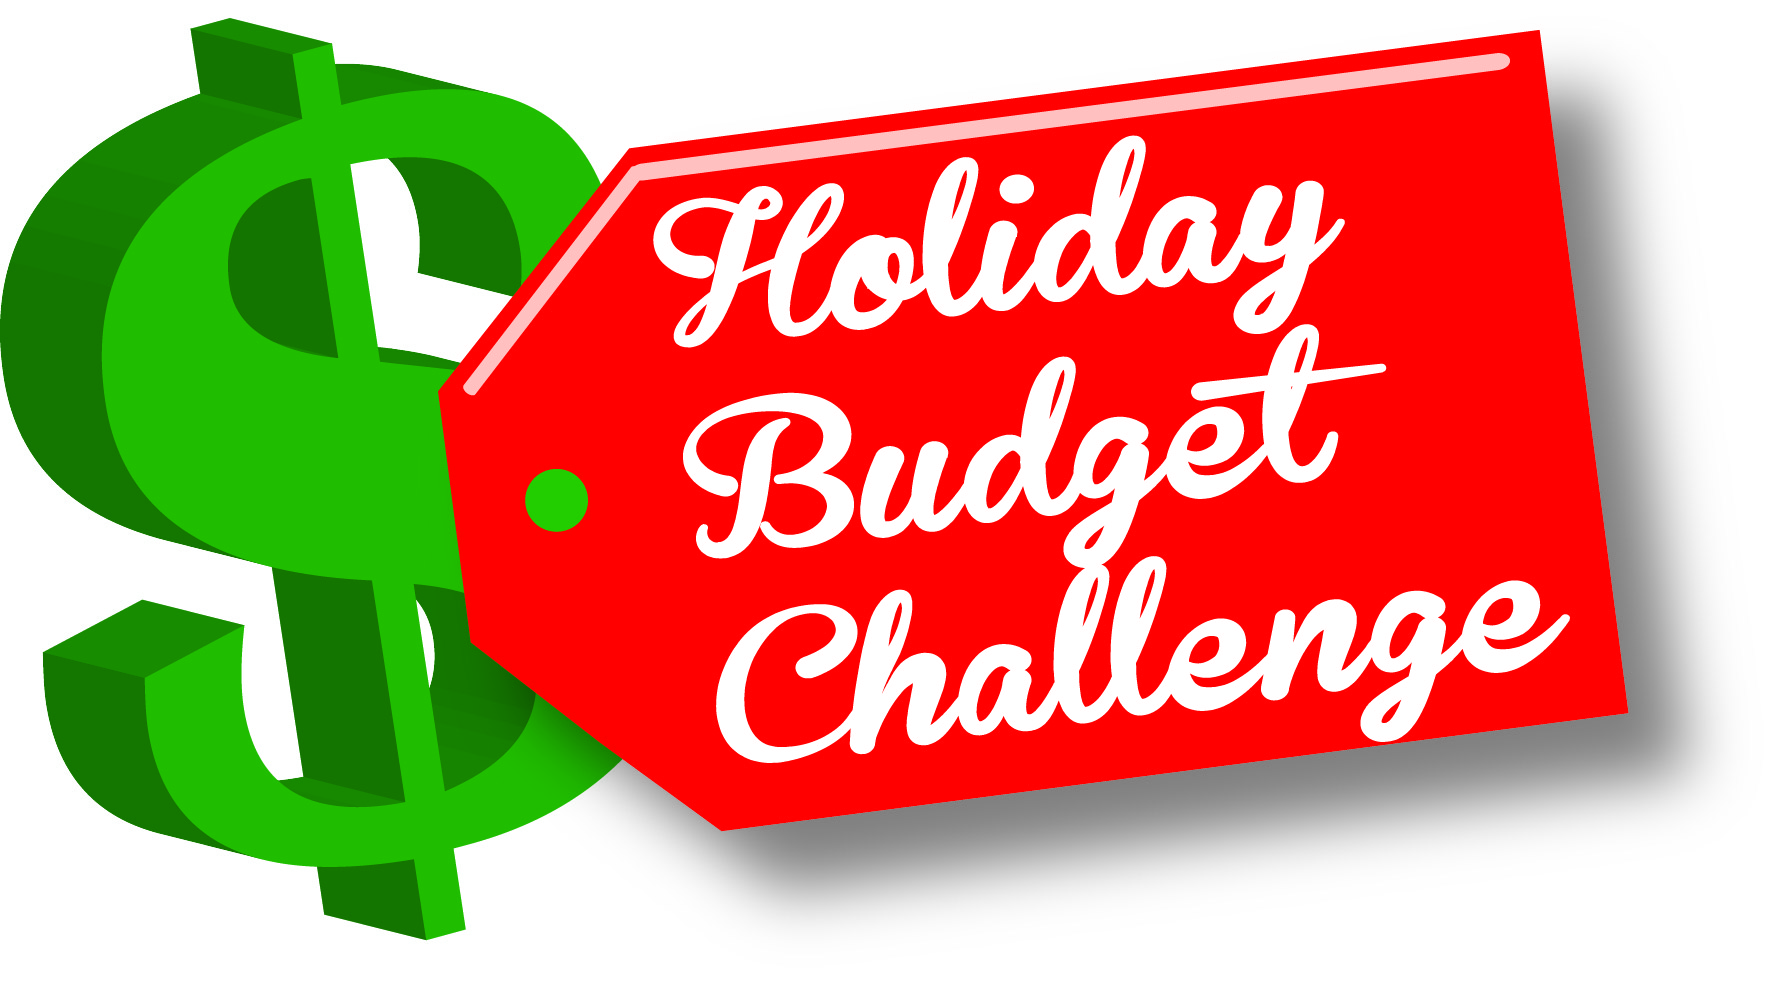 Avoid credit card debt with this budget challenge. 